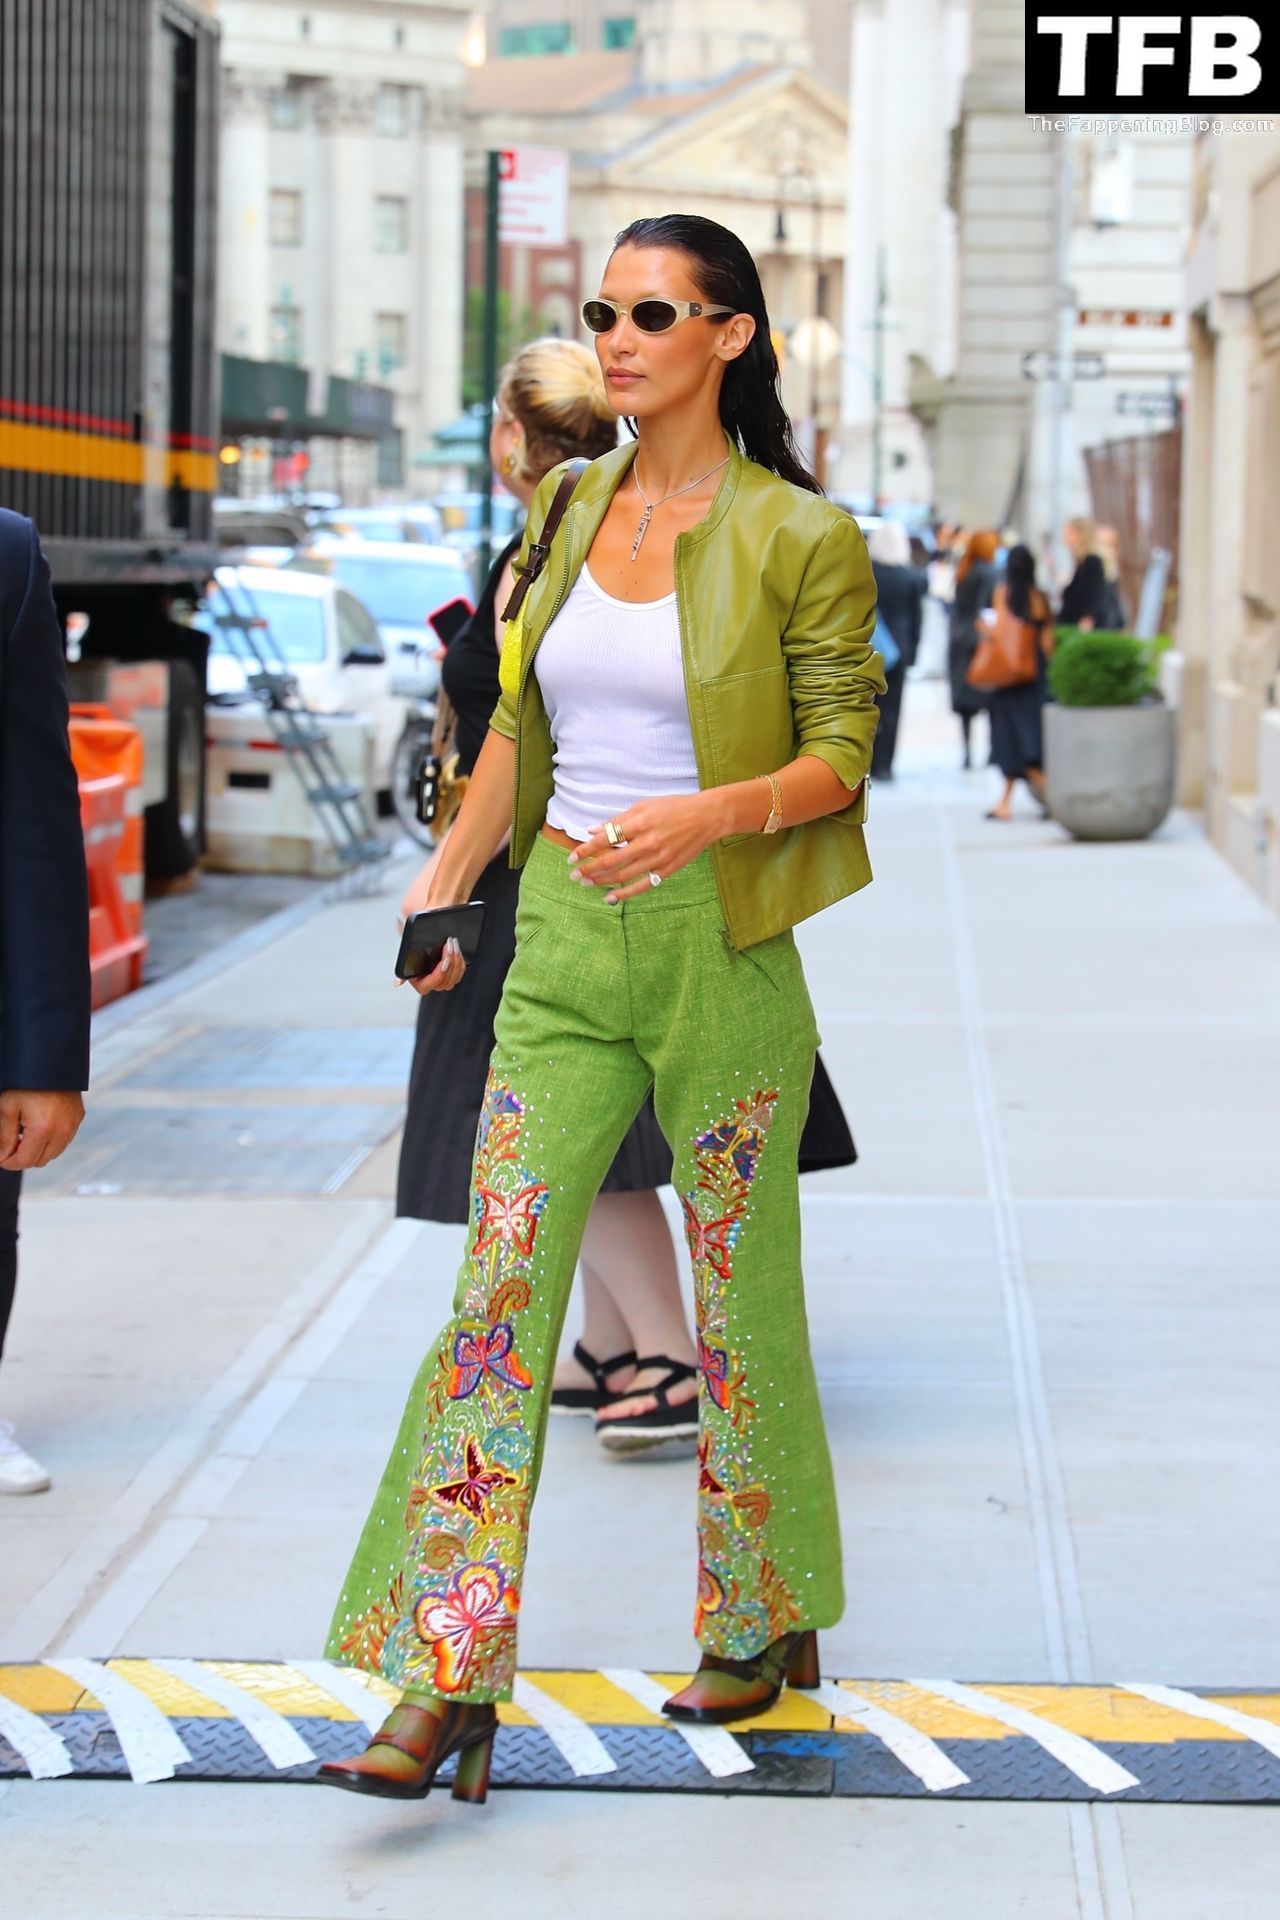 Bella Hadid See Through Braless The Fappening Blog 22 - Braless Bella Hadid Wears the Cutest Lime Green Look While Out in NYC (54 Photos)